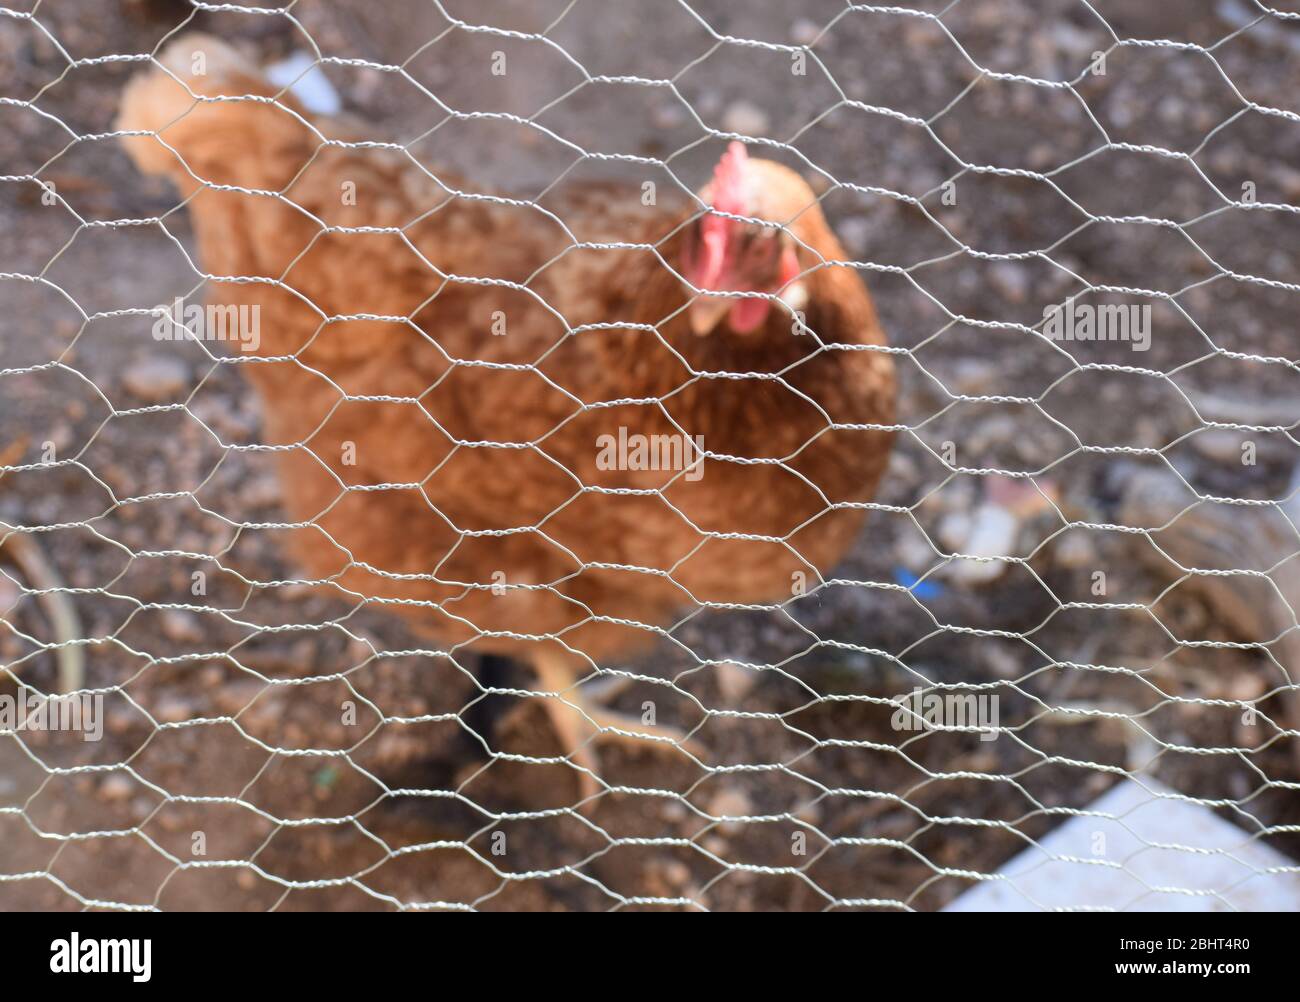 Brown chicken behind a barbed wire fence. Stock Photo